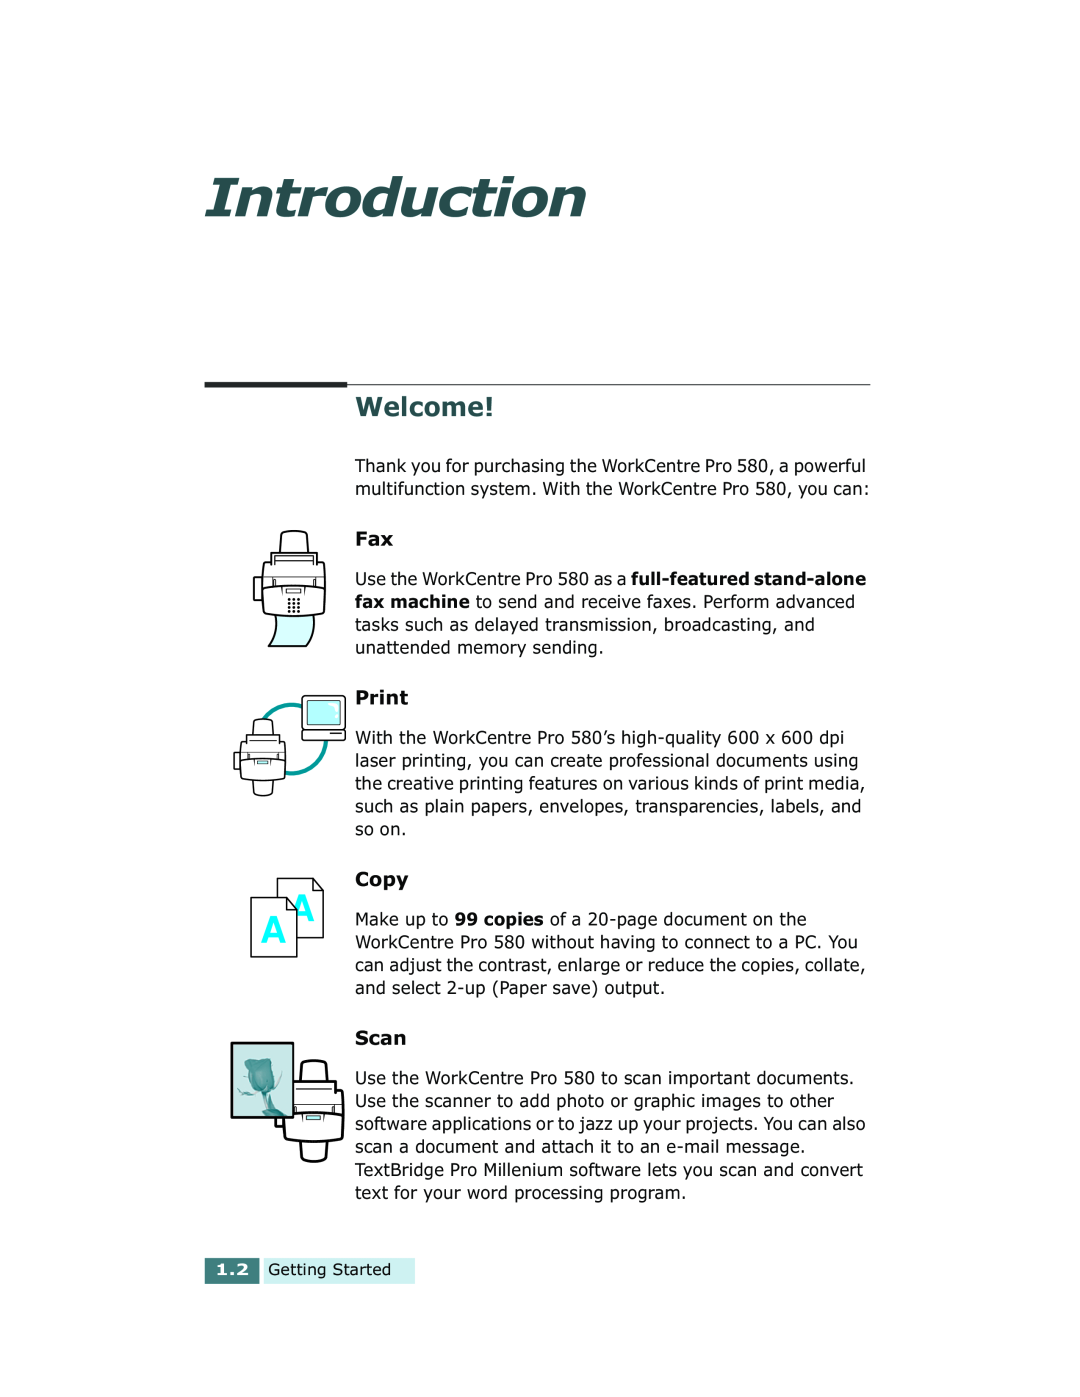 Xerox Pro 580 manual Introduction, Welcome, Print, Copy, Scan 